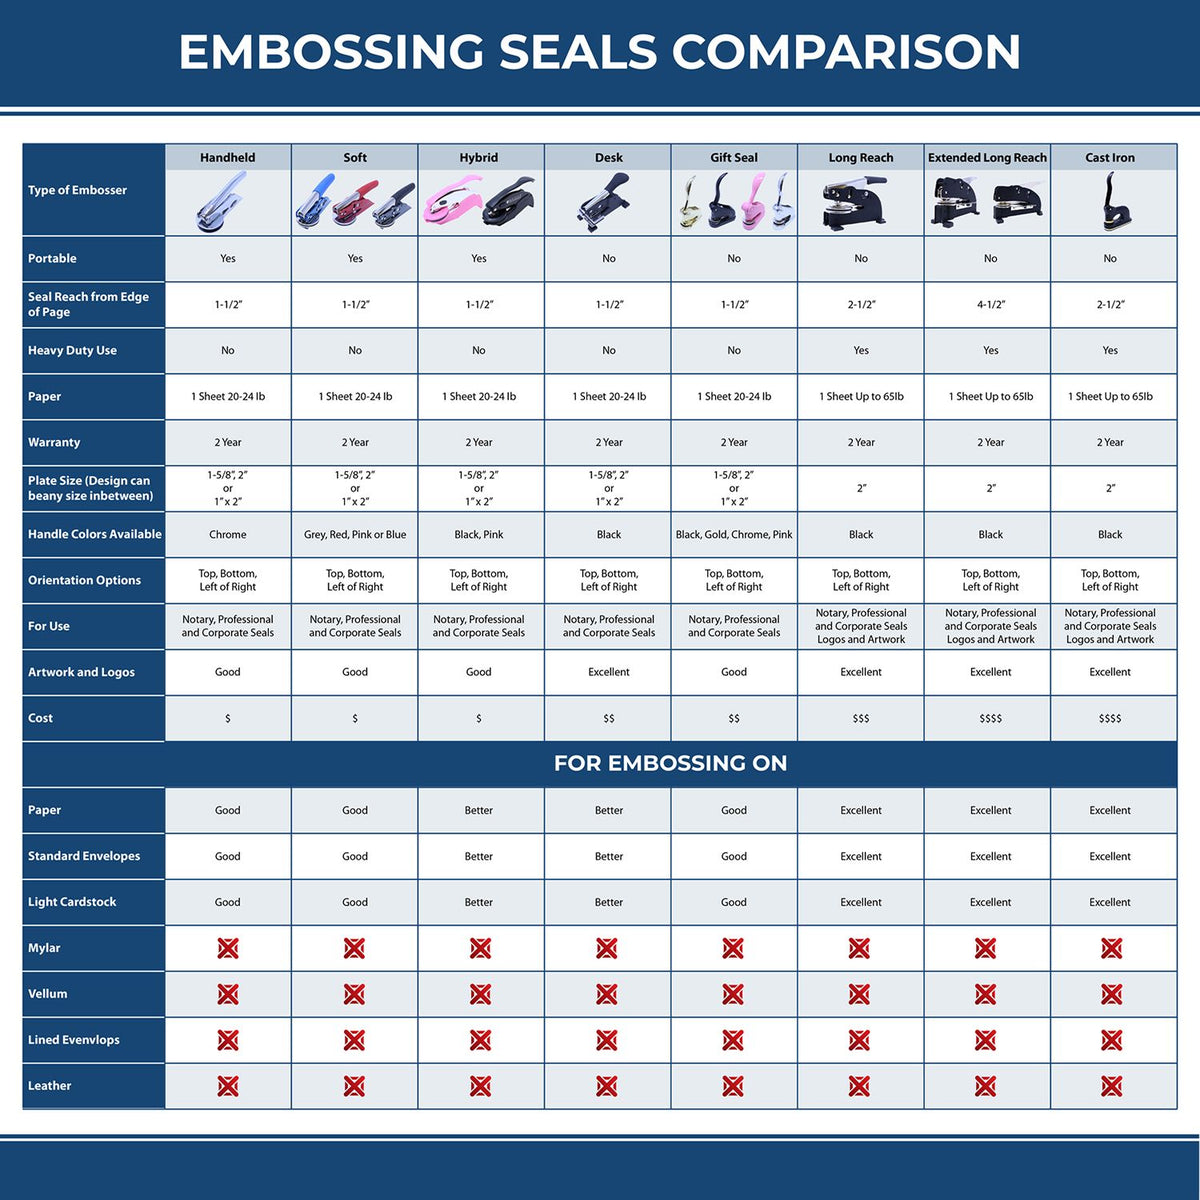 A comparison chart for the different types of mount models available for the State of Washington Soft Land Surveyor Embossing Seal.